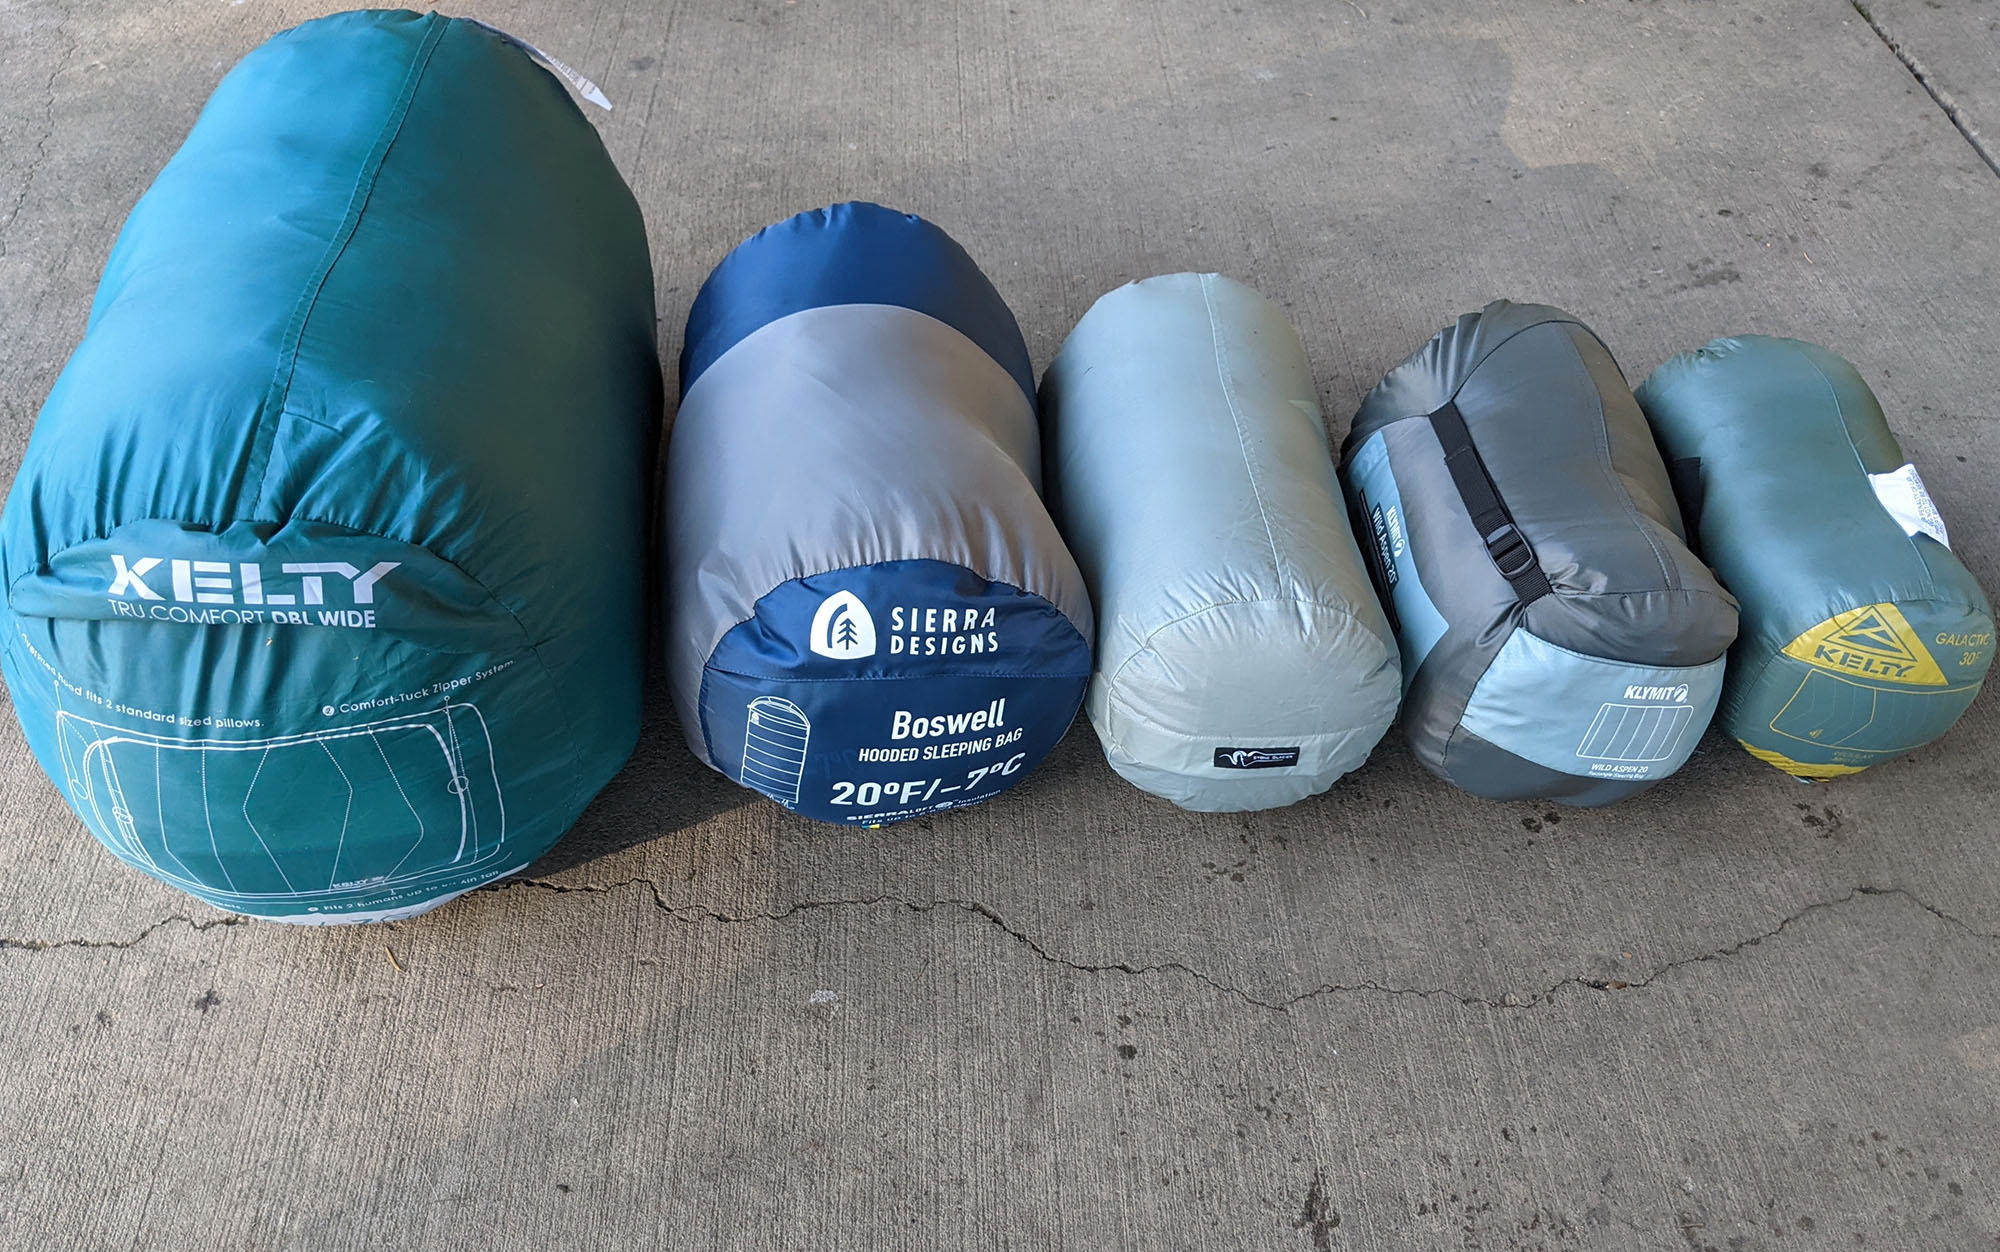 One major selling point of the Galactic 30 (far right) is its exceptionally small packed size. Also featured are the Kelty Tru Comfort Doublewide, Sierra Designs Boswell, Stone Glacier Chilkoot, and Klymit Wild Aspen Rectangle.